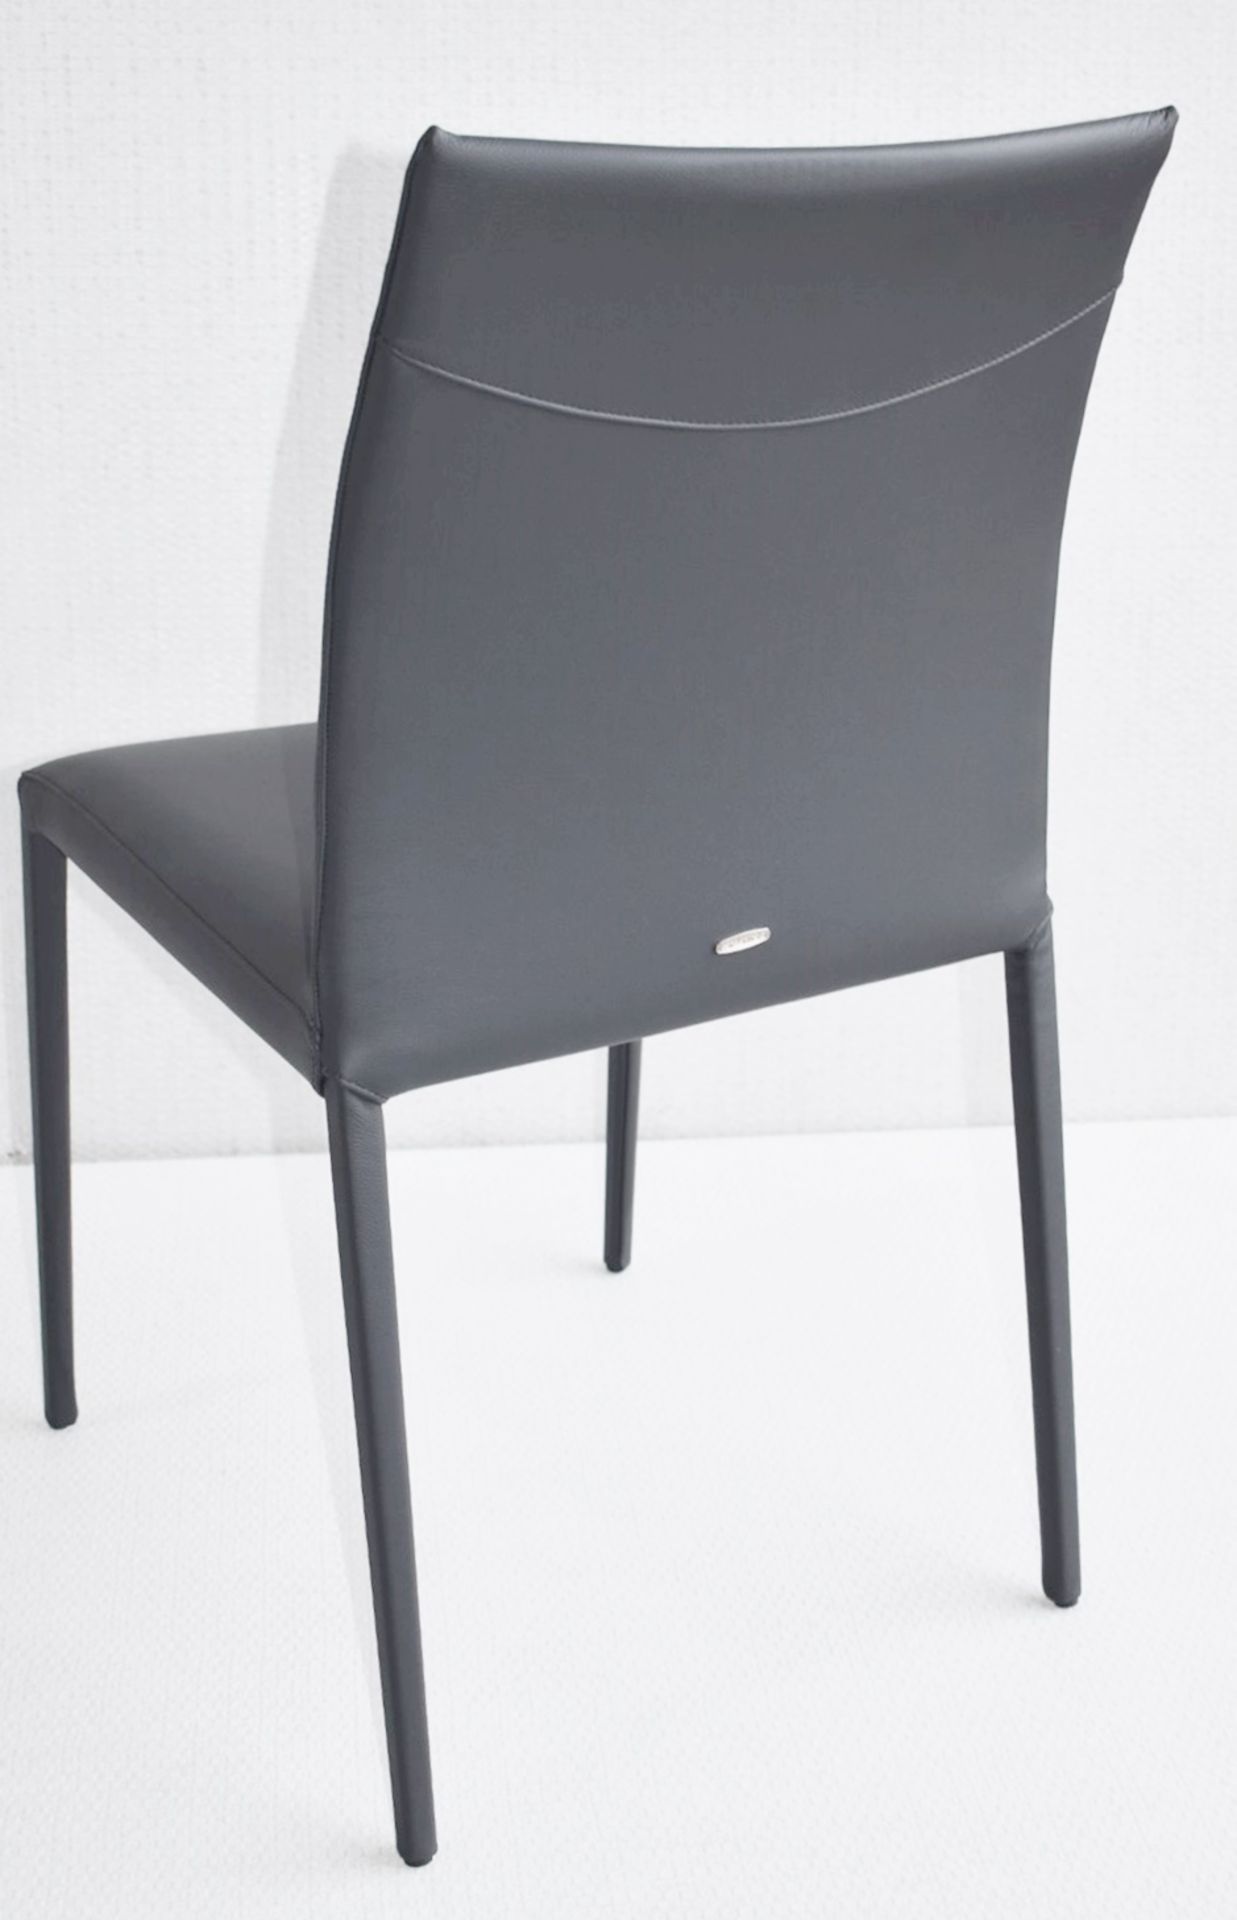 Pair of CATTELAN ITALIA Norma Designer Leather Upholstered Dining Chairs - Original Price £1,258 - Image 4 of 7